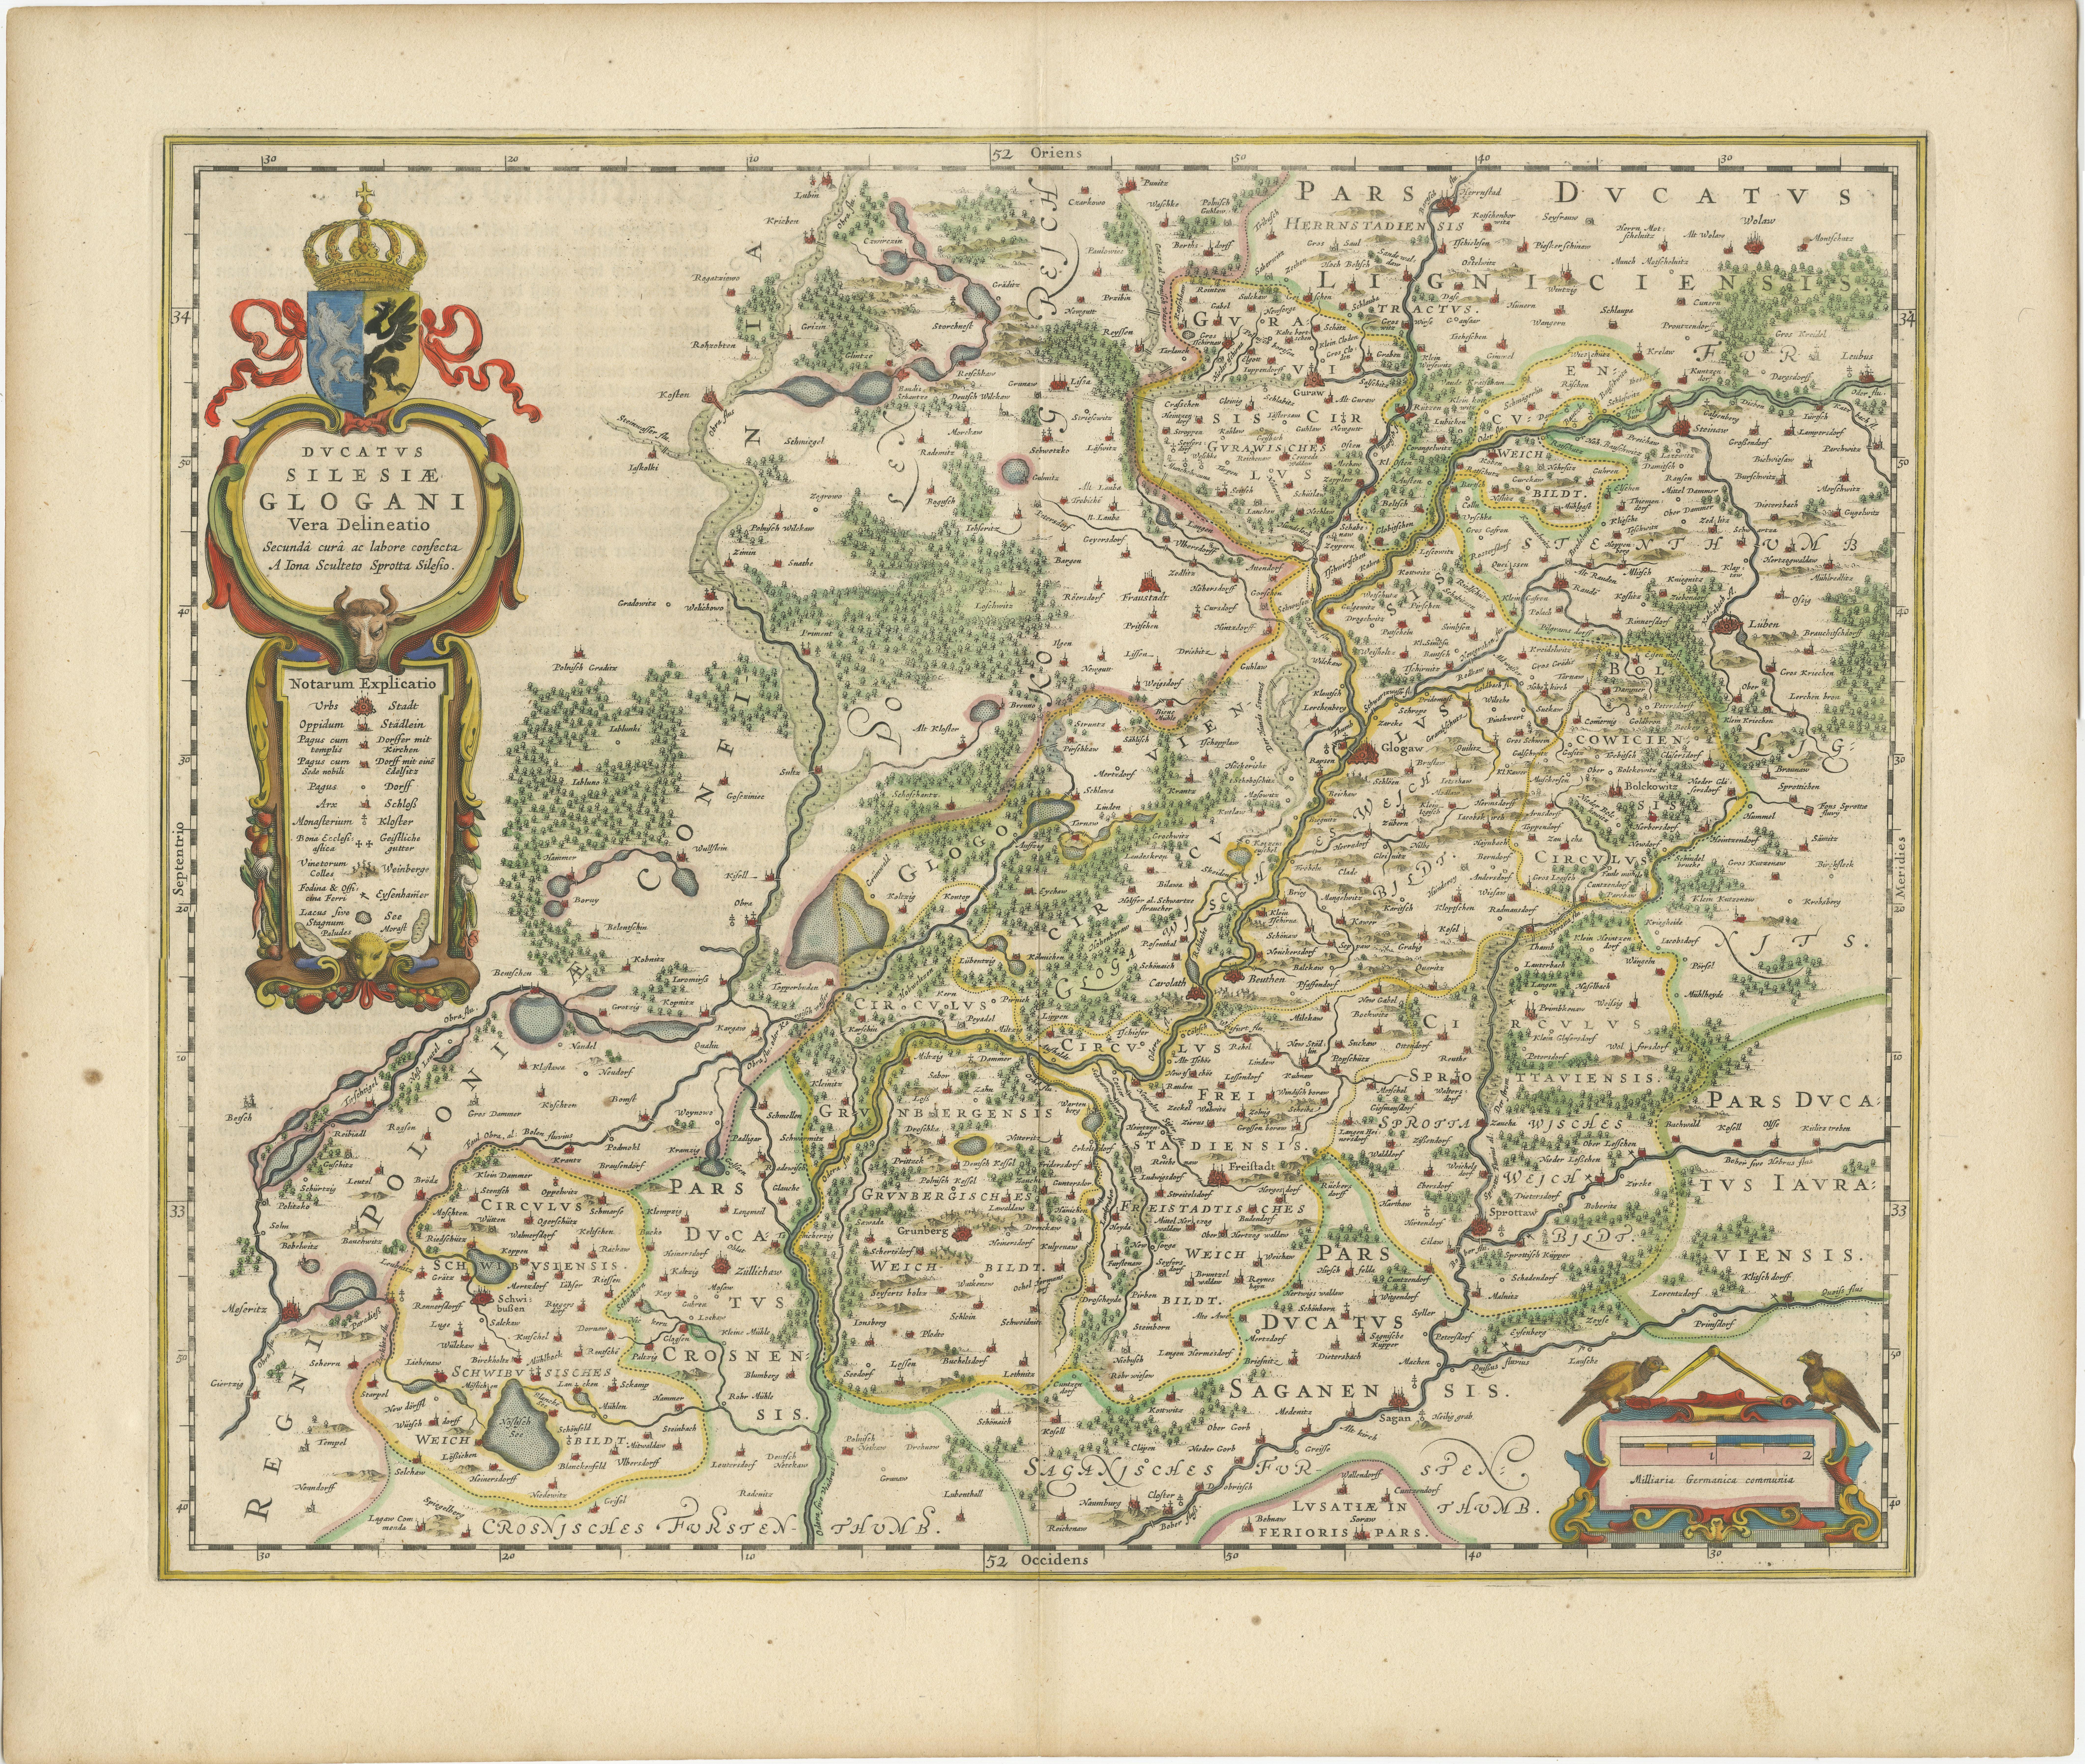 Antique map titled 'Ducatus Silesiae Glogani vera delineatio'. This decorative map shows the Odra River valley based on the Silesian cartographer, Jonas Scultetus. The map is oriented with north to the left and is roughly centered on the city of